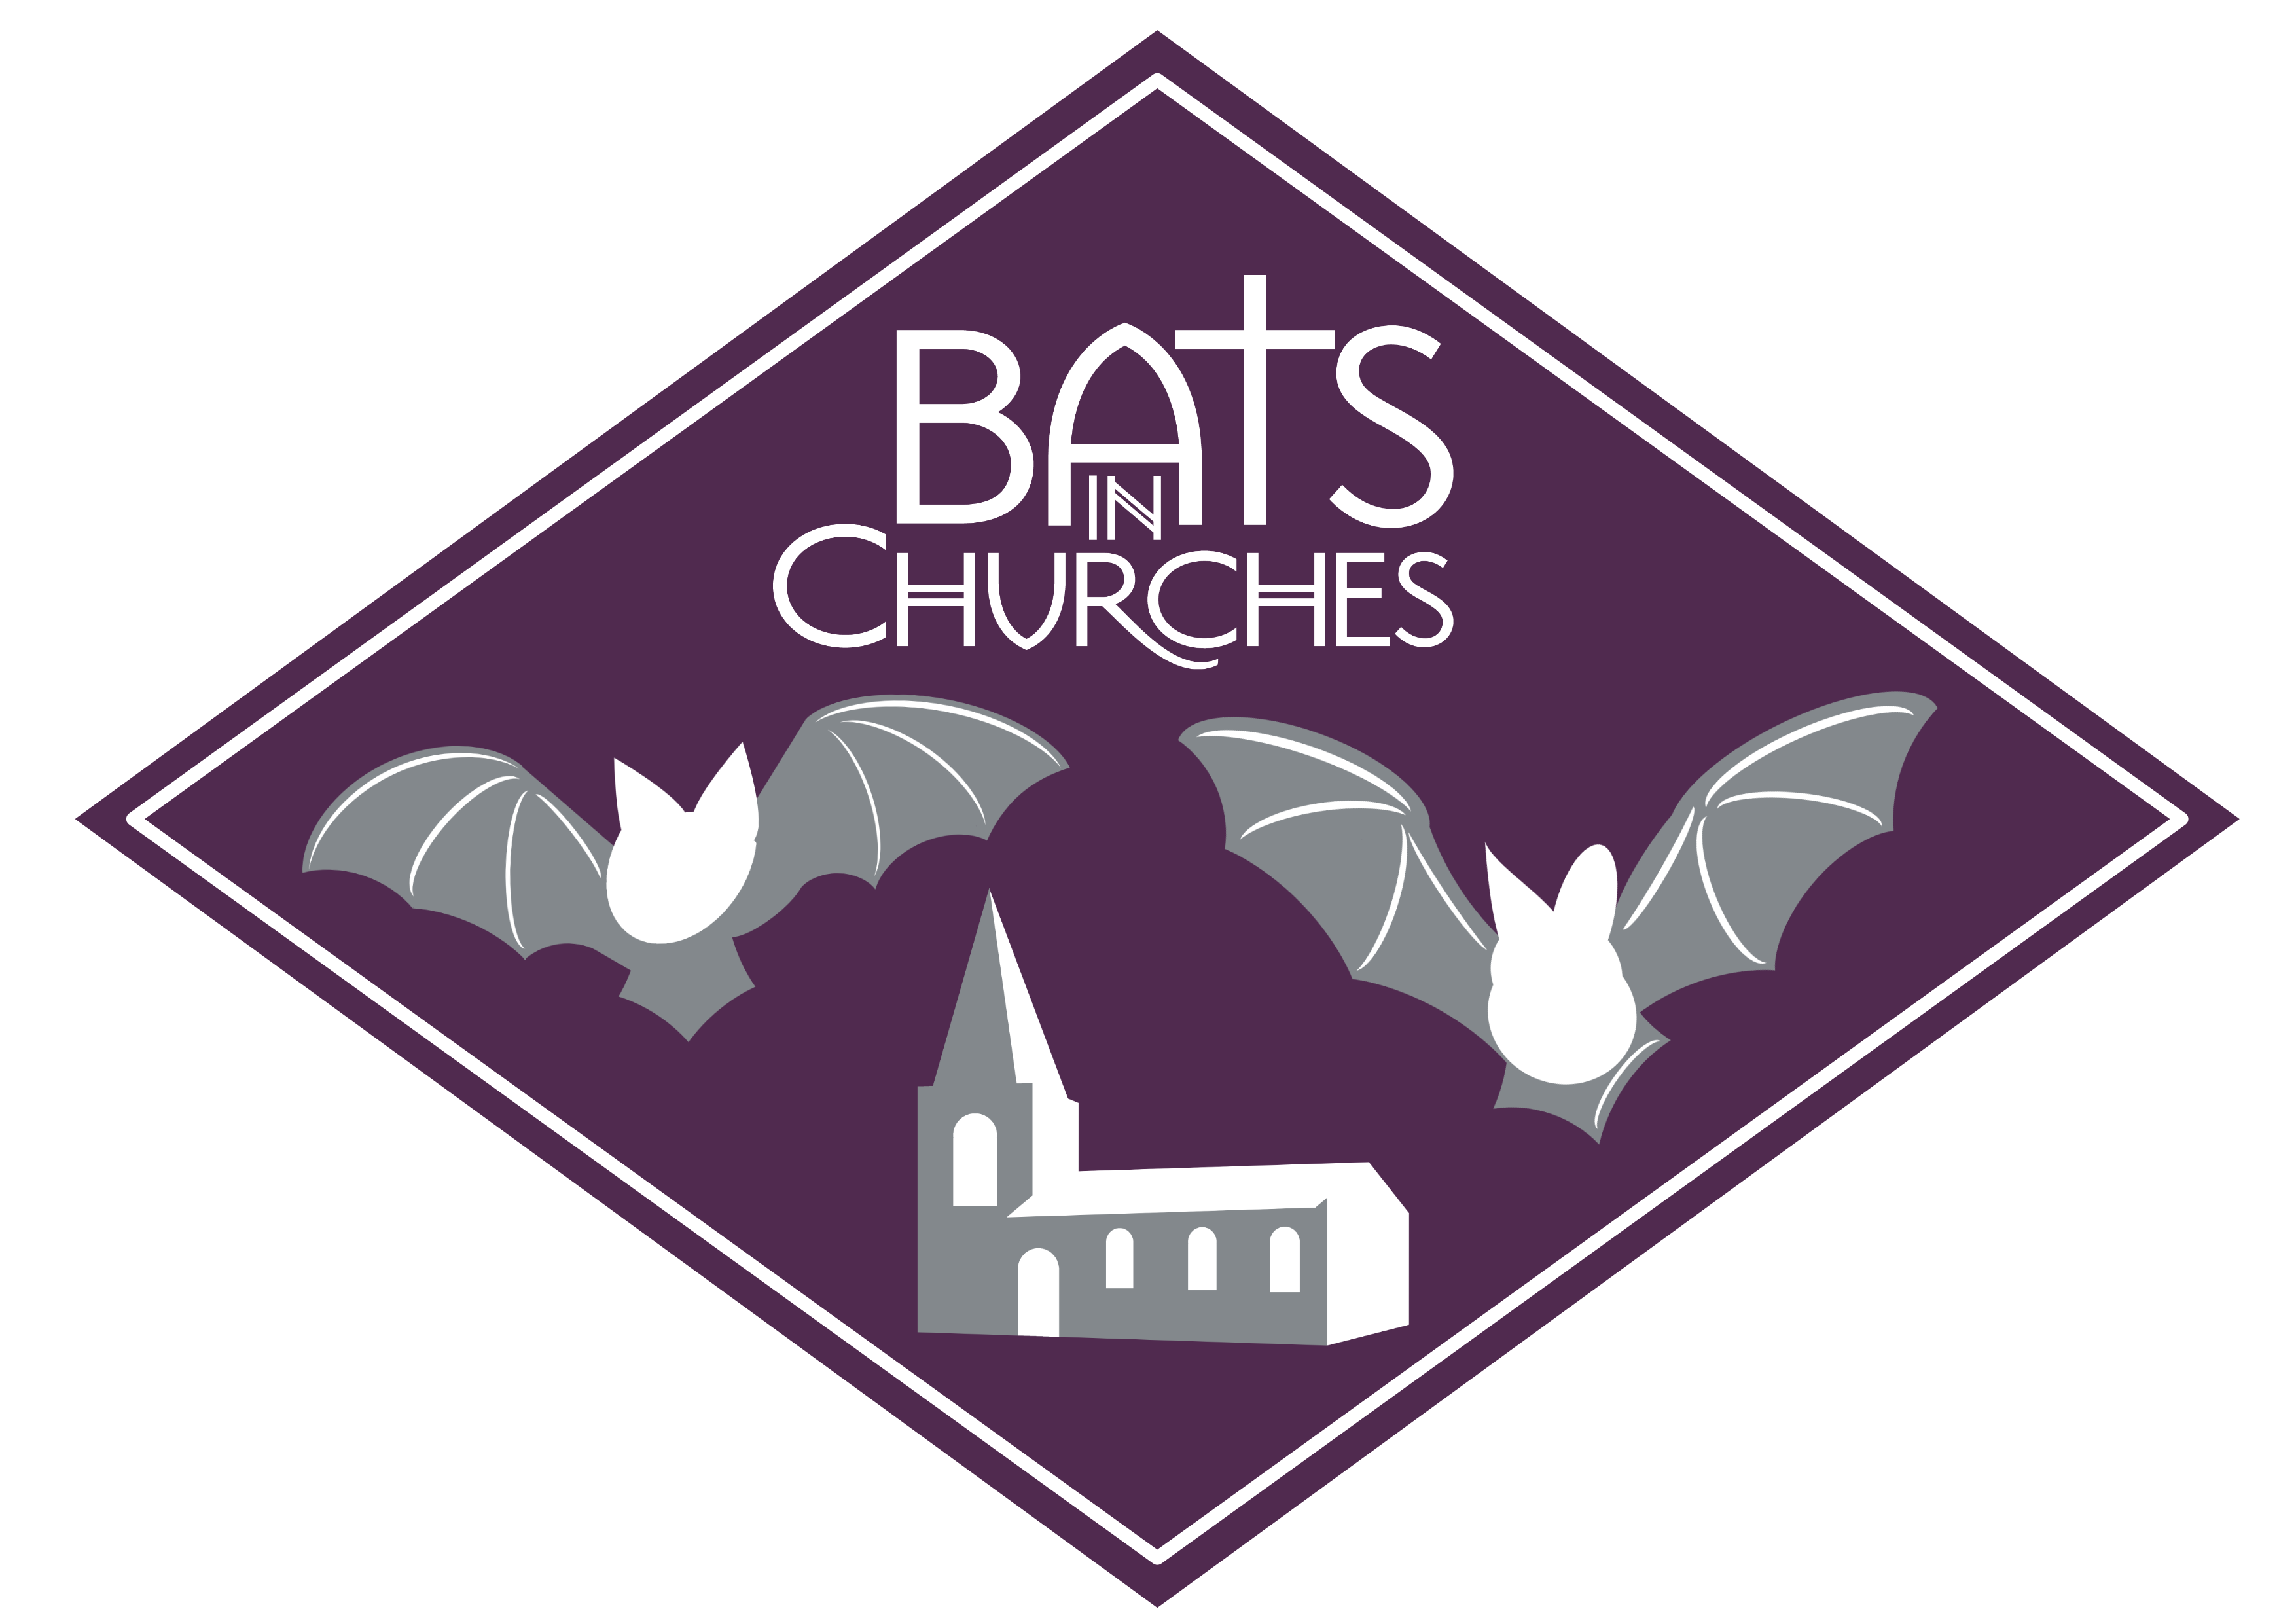 Diamond shaped woven badge with bats and a church